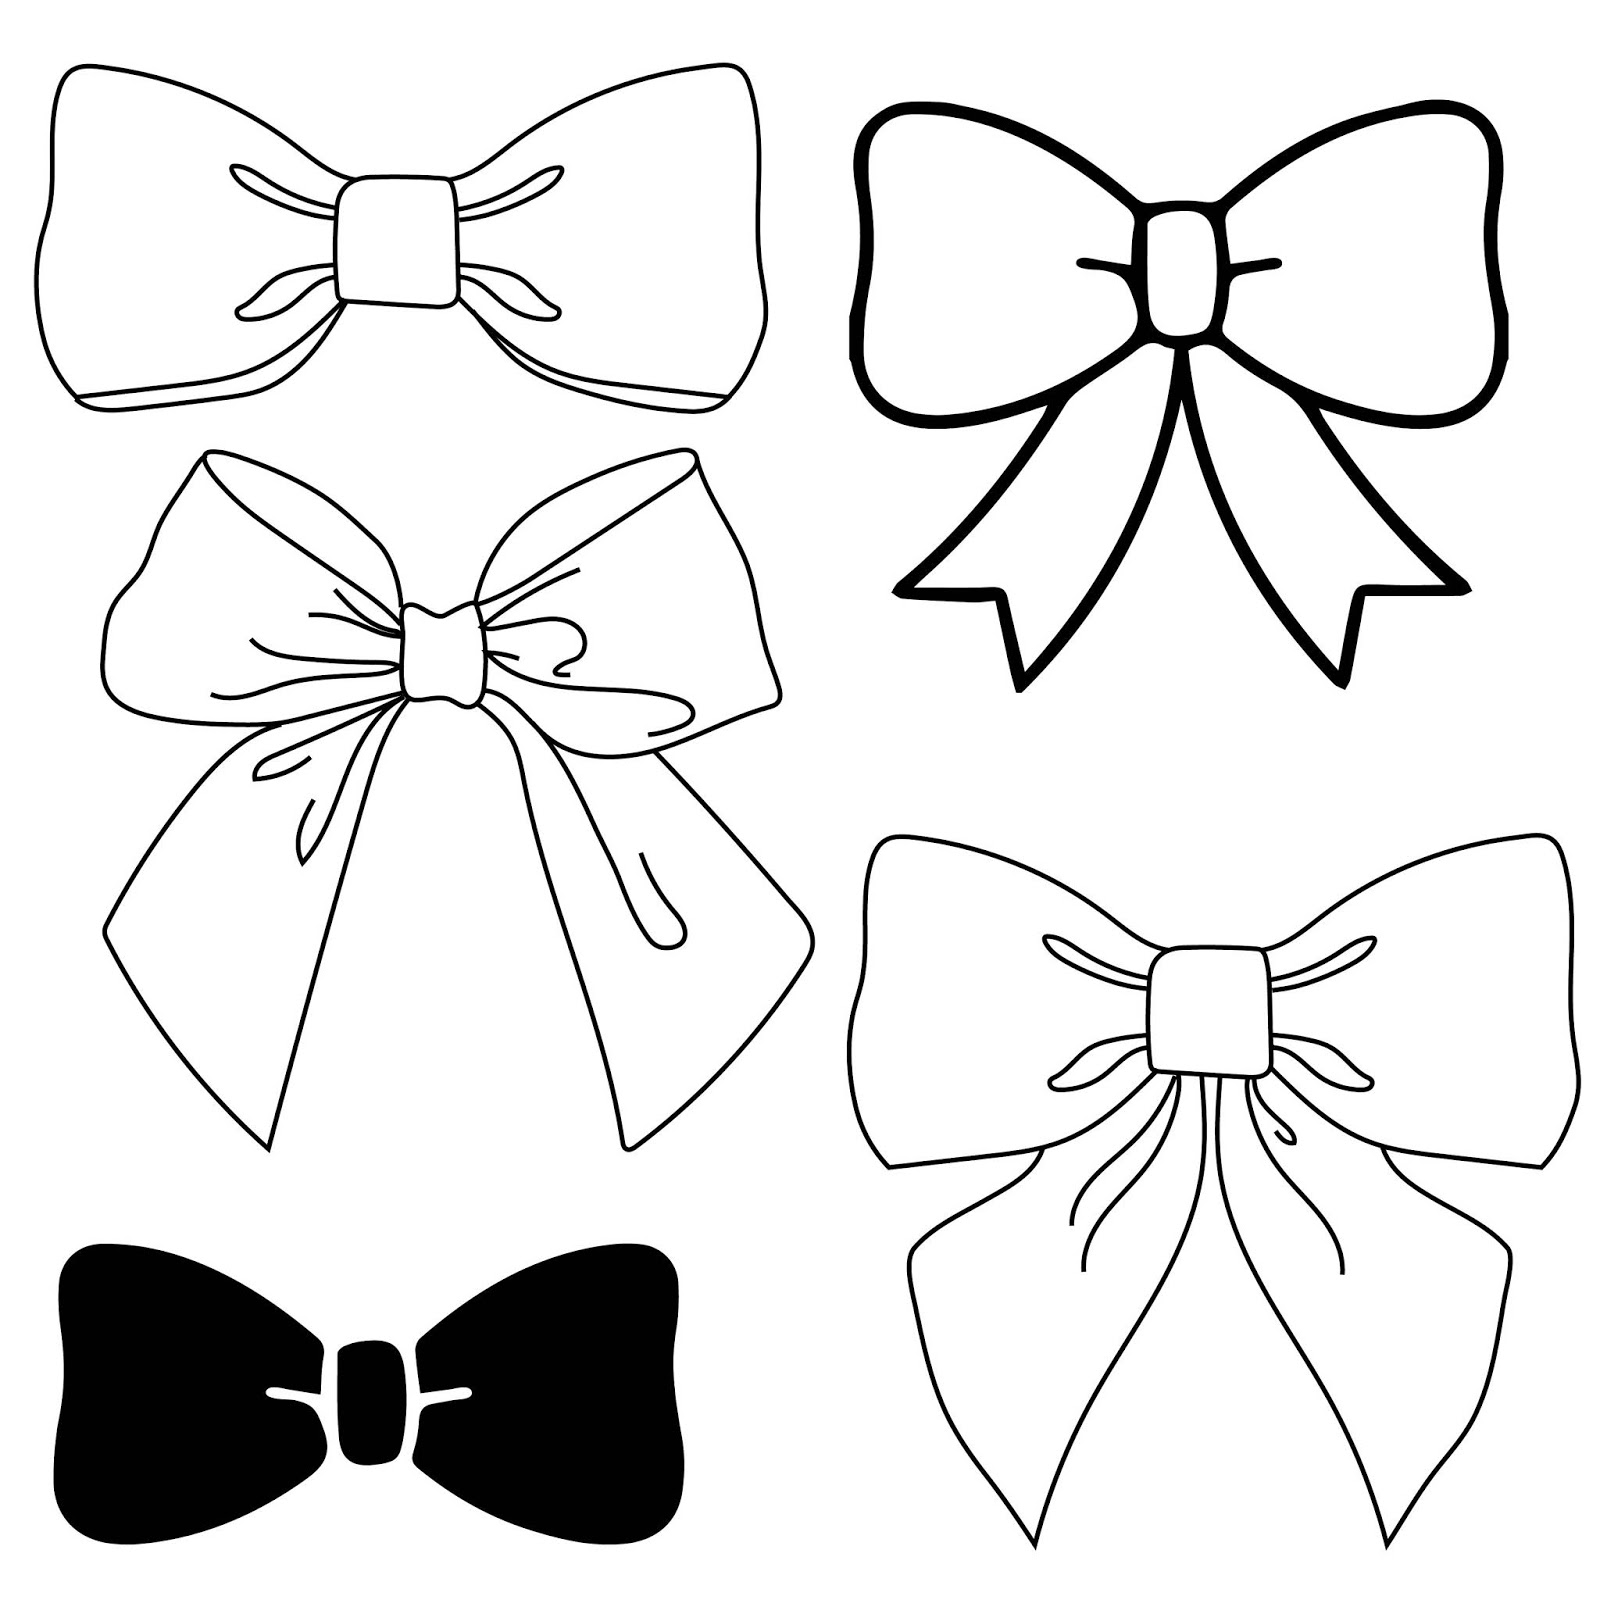 Download Free Bow Silhouette SVG DXF Cut File